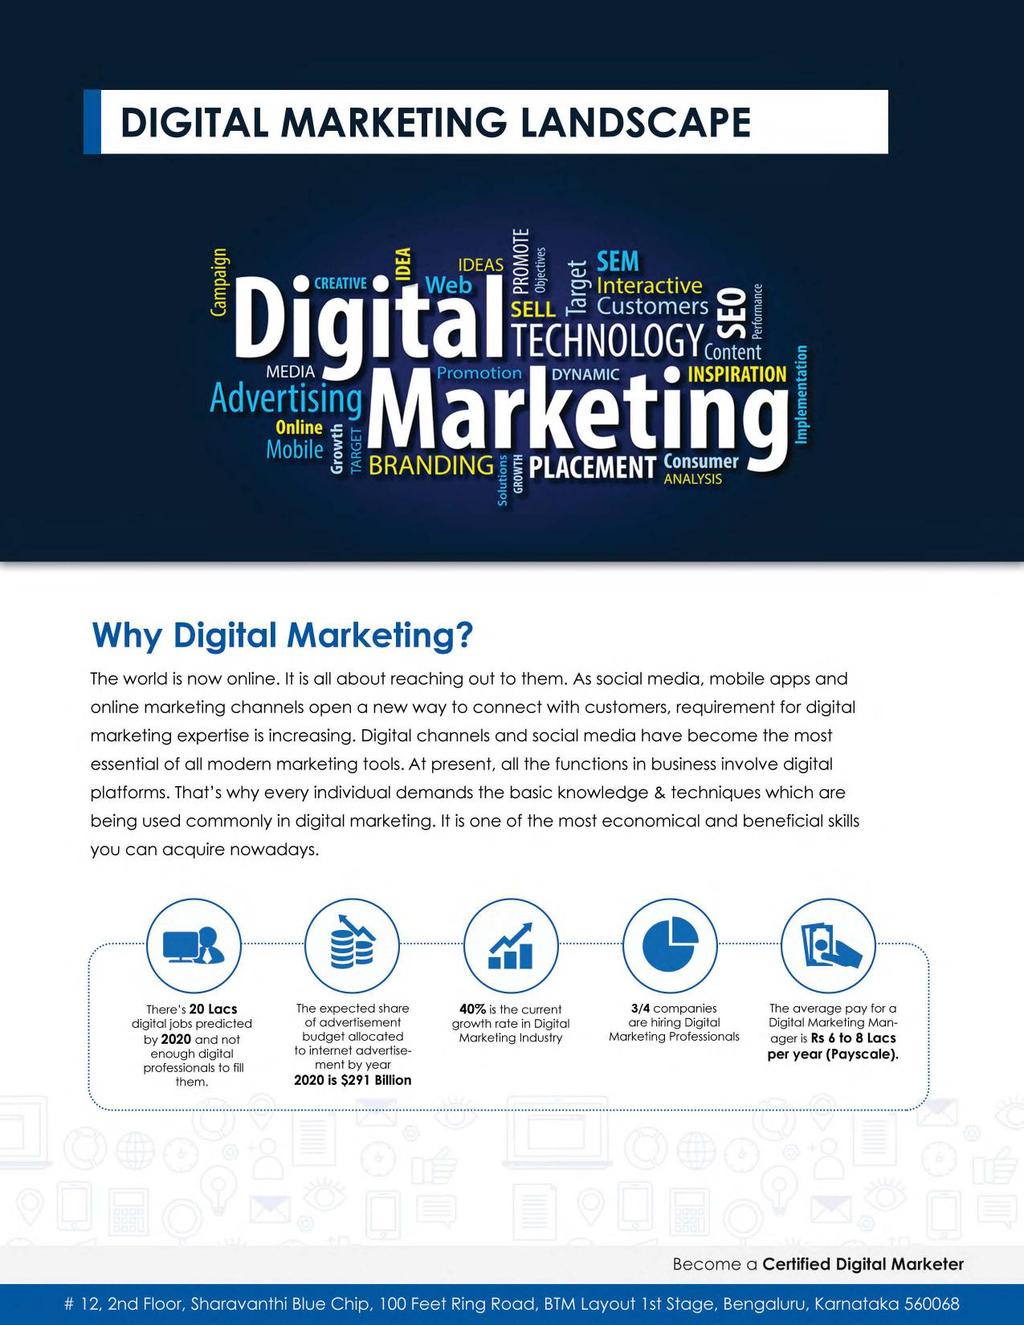 Why Digital Marketing? The world is now online. It is all about reaching out to them.